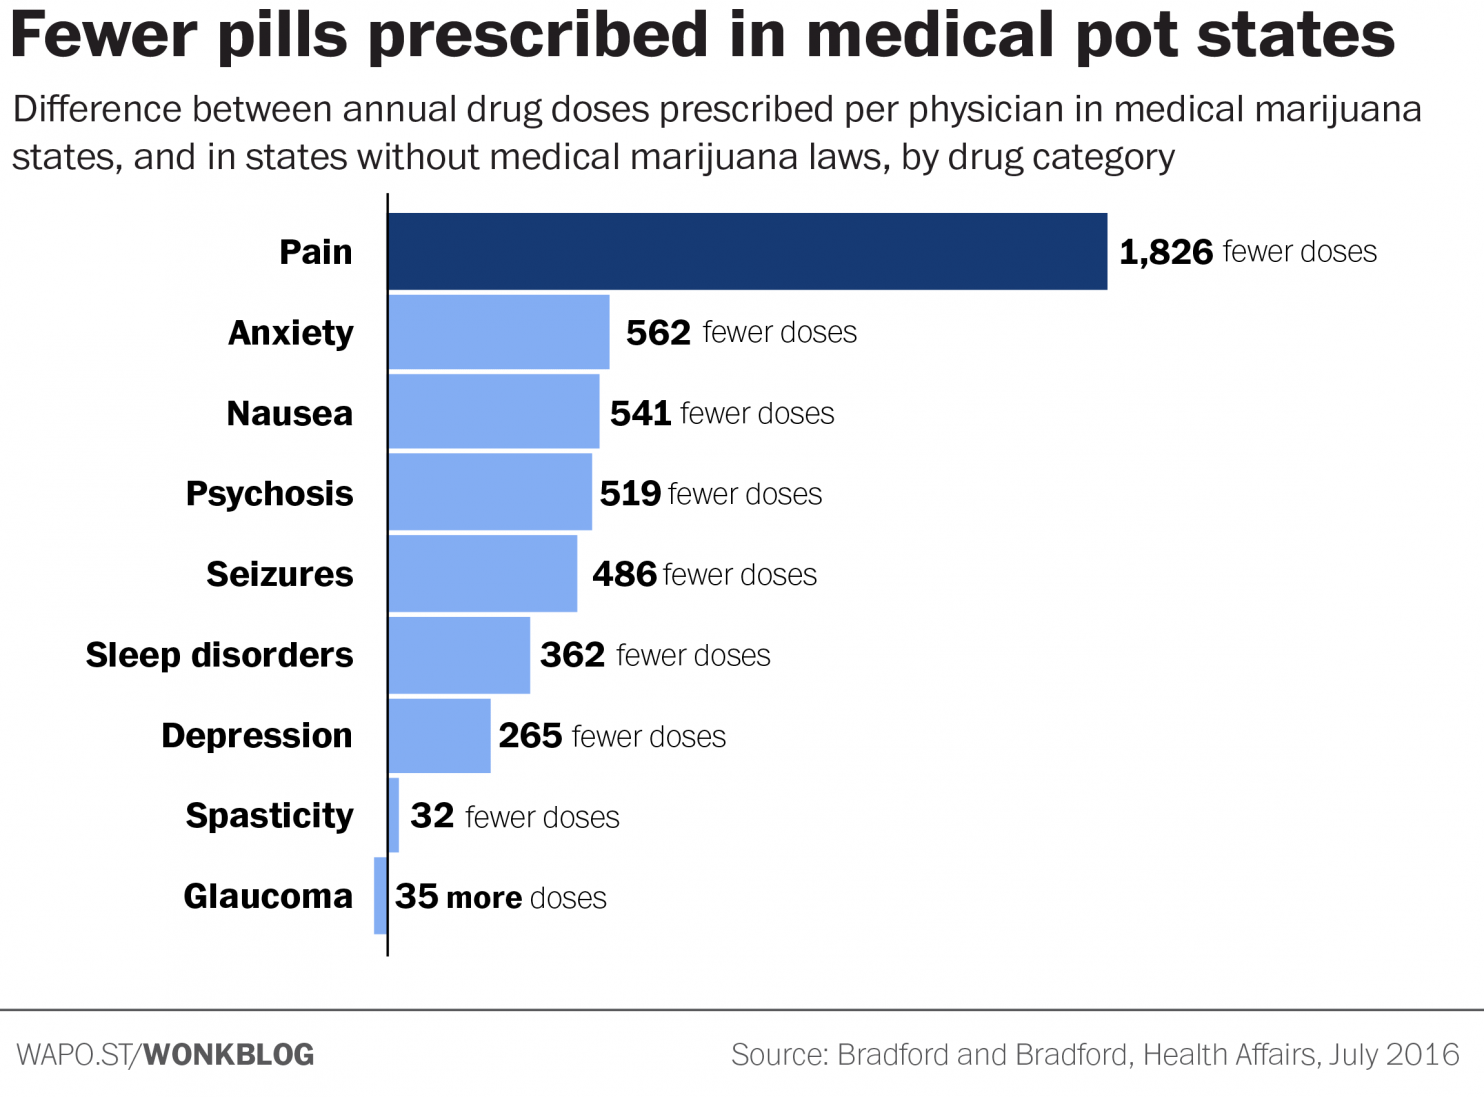 "Fewer pills prescribed in medical pot states." 